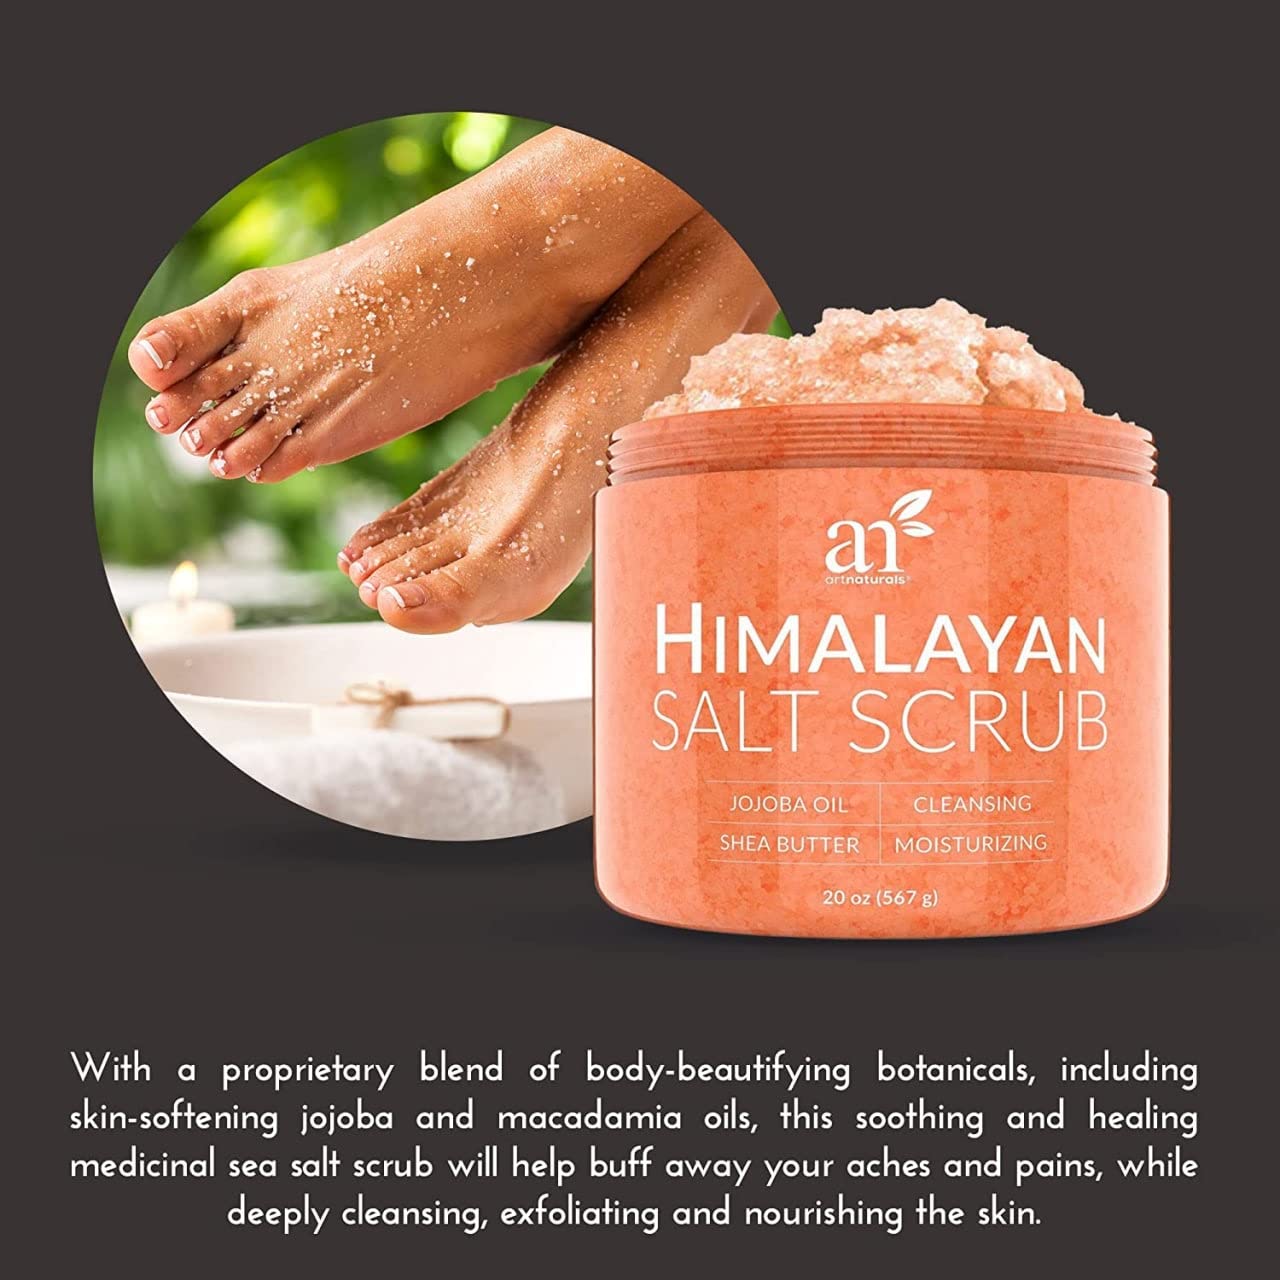 artnaturals Himalayan Body Scrub and Face Scrub - (20 Oz) - Deep Cellulite Cleansing Exfoliator with Sugar, Shea Butter, Exfoliating Himalayan - Natural Pink for Hand, Skin and Facial - Men and WomenButter, Exfoliating Himalayan - Natural Pink for Hand, S